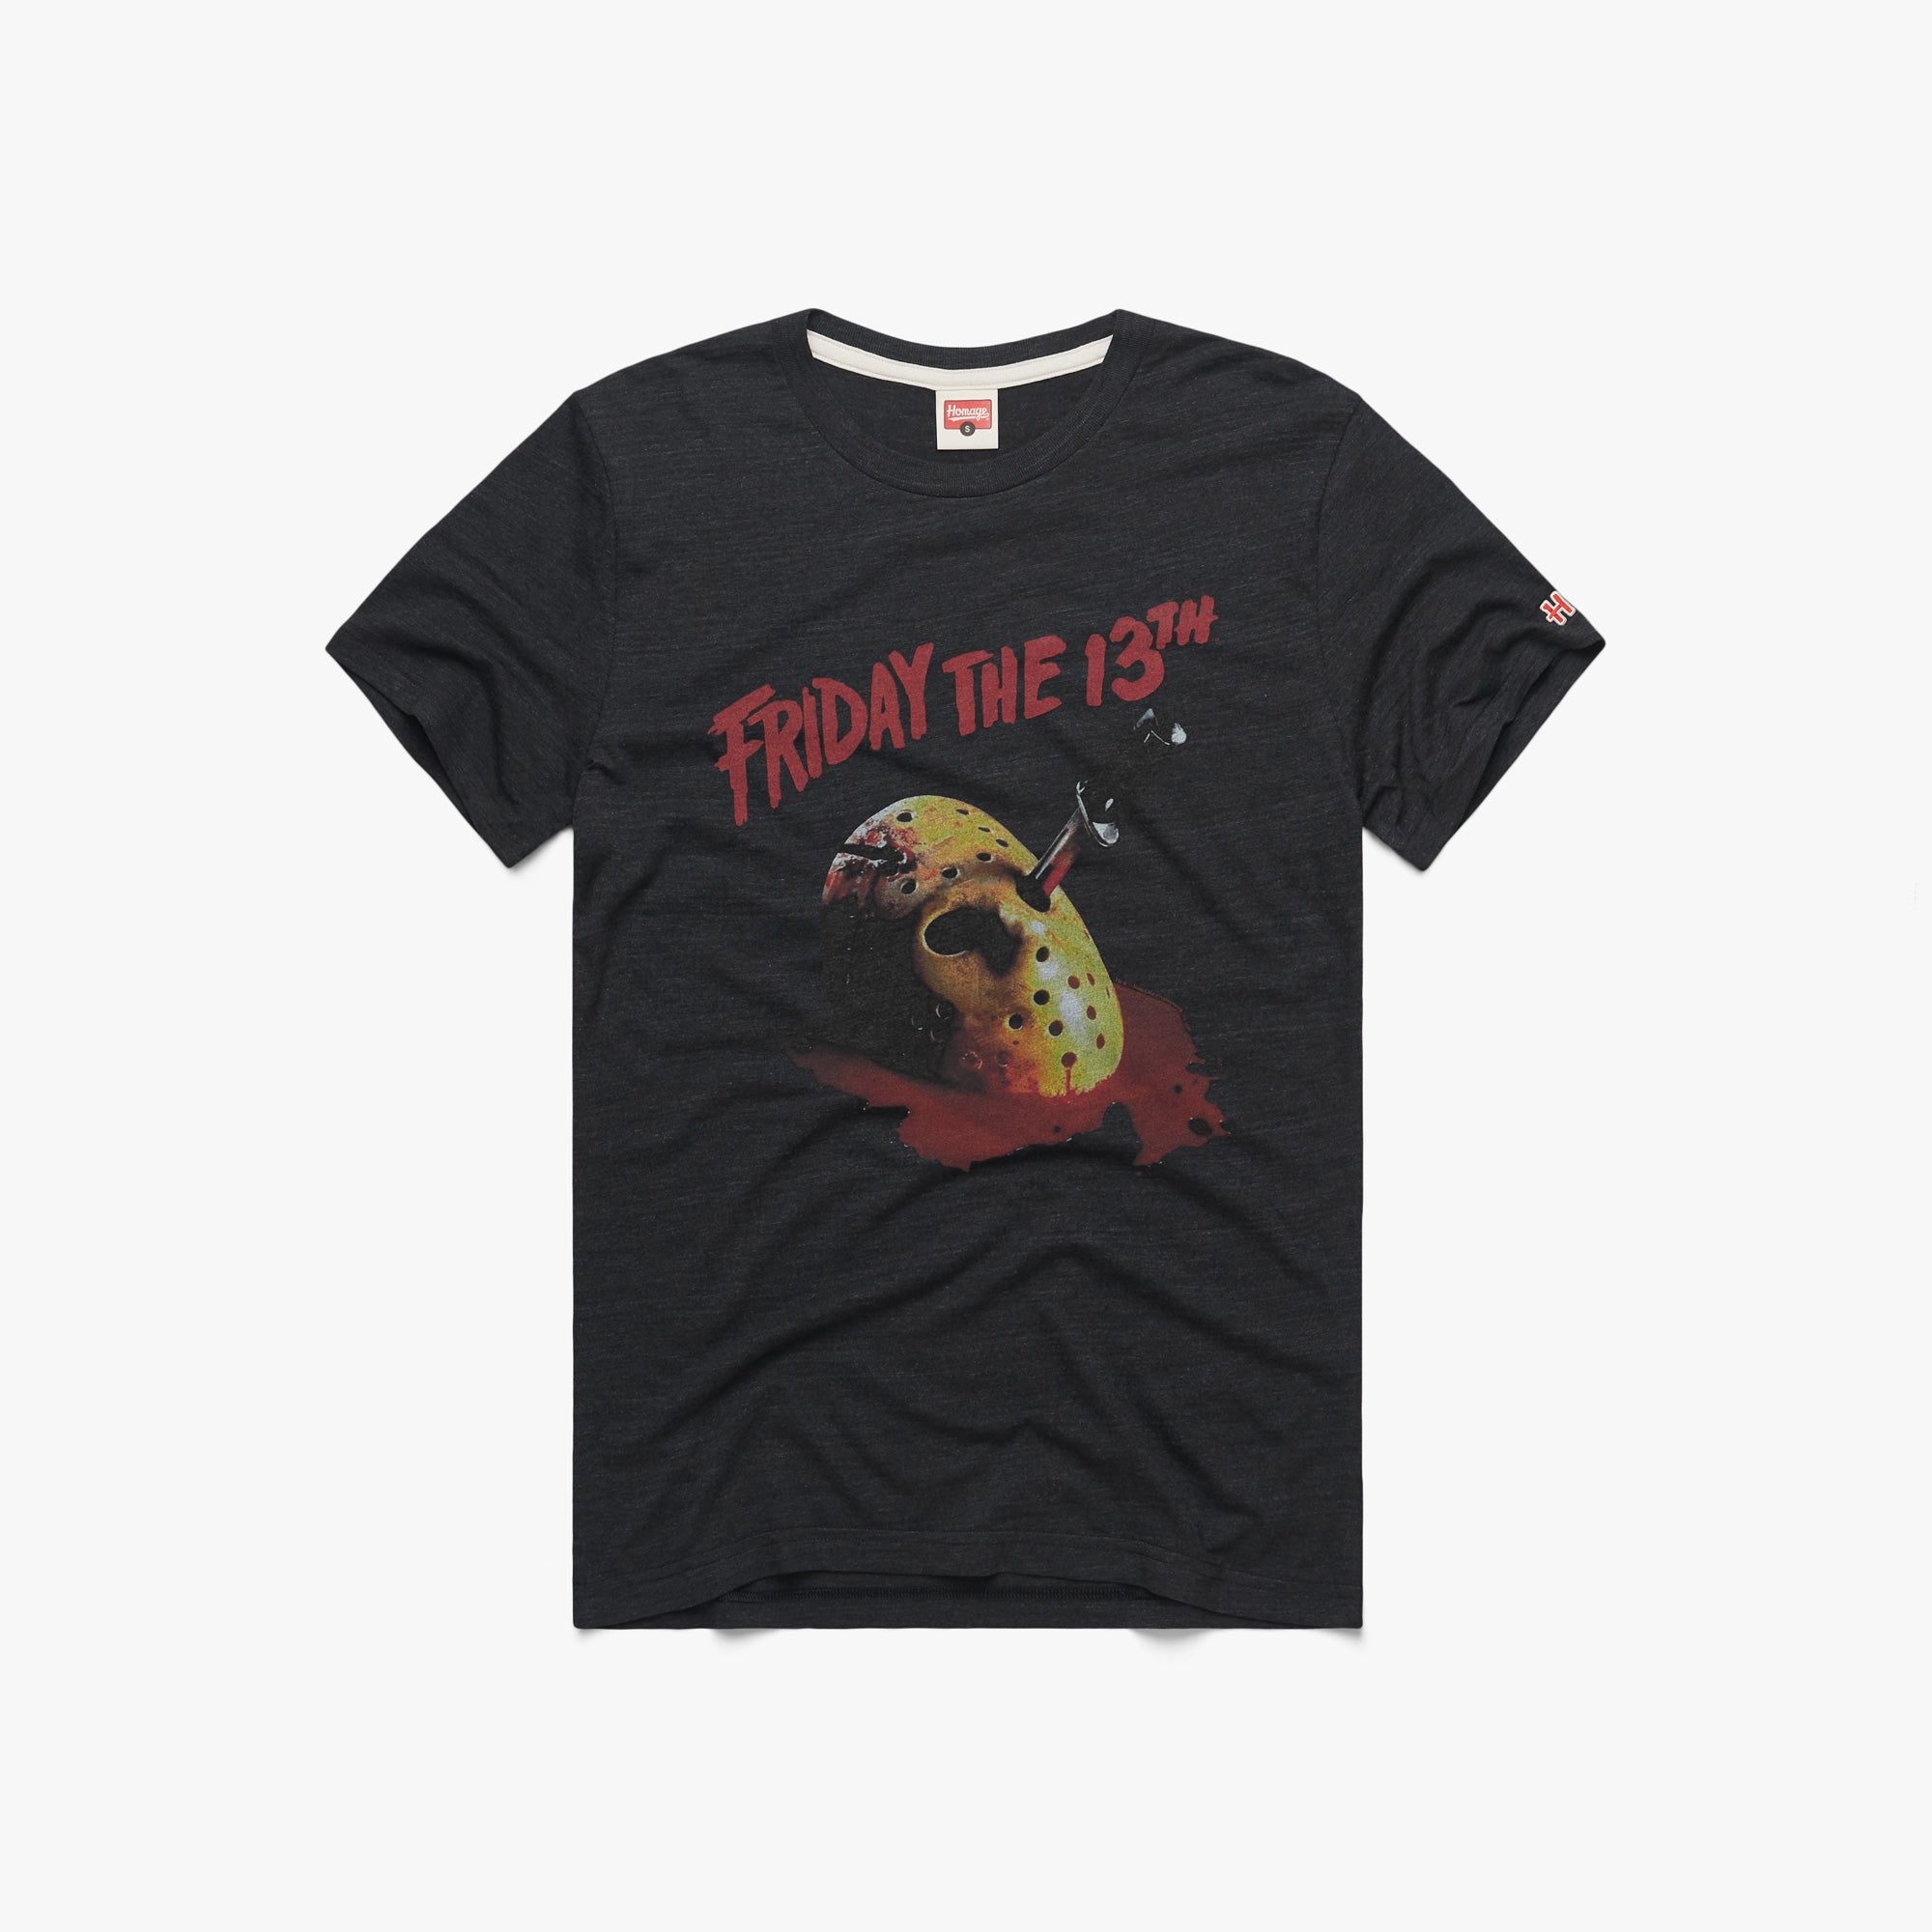 Sømil flugt tvilling Friday The 13th | Retro Scary Movie T-Shirt – HOMAGE